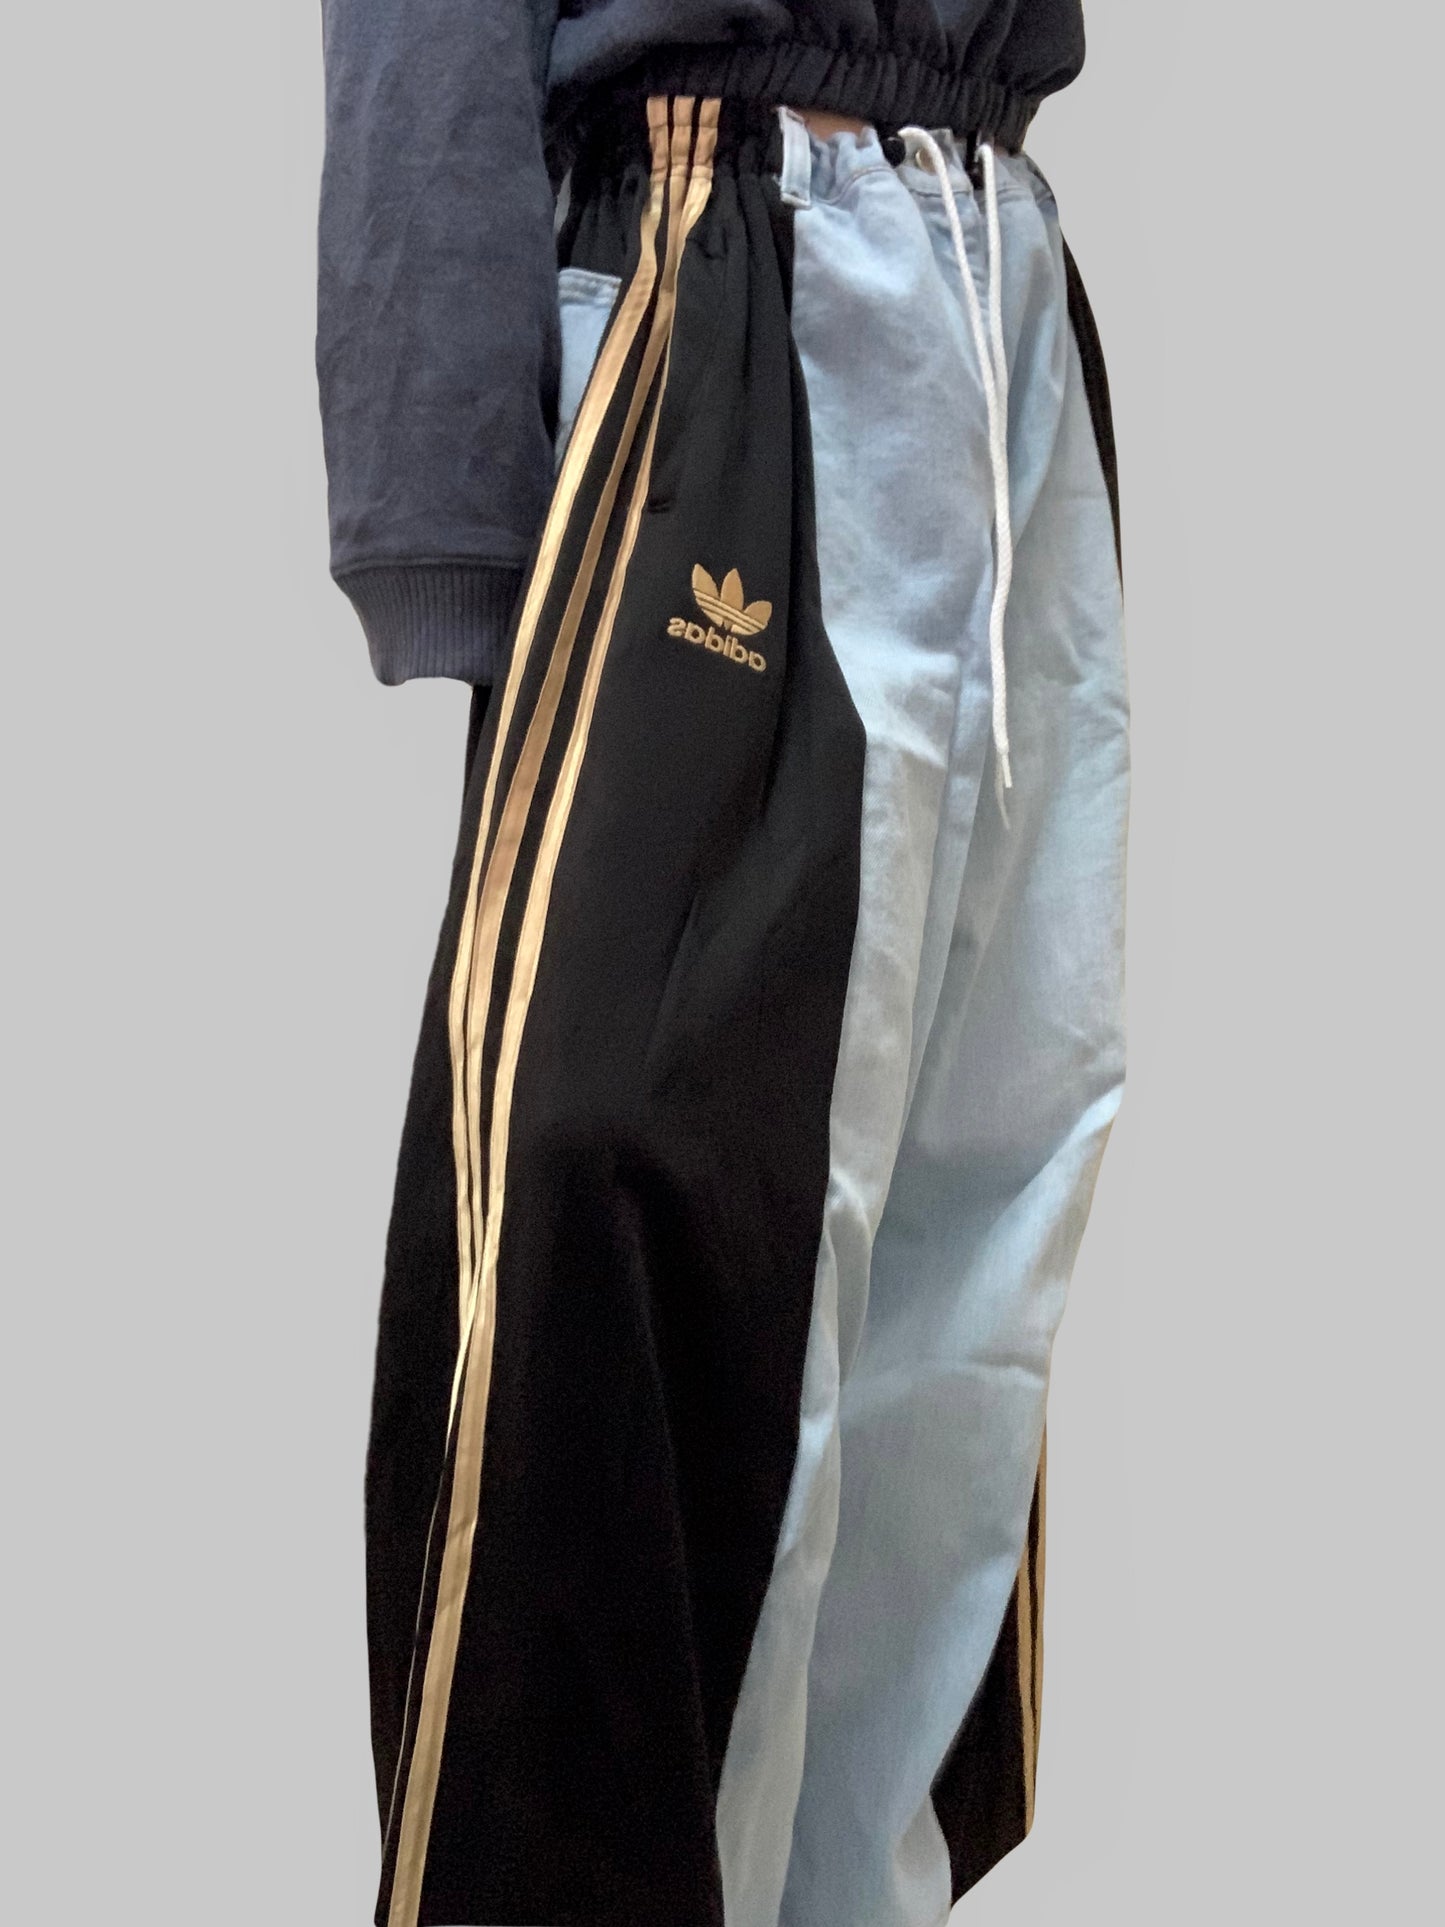 Adidas Remade Jeans X Sweatpants #8